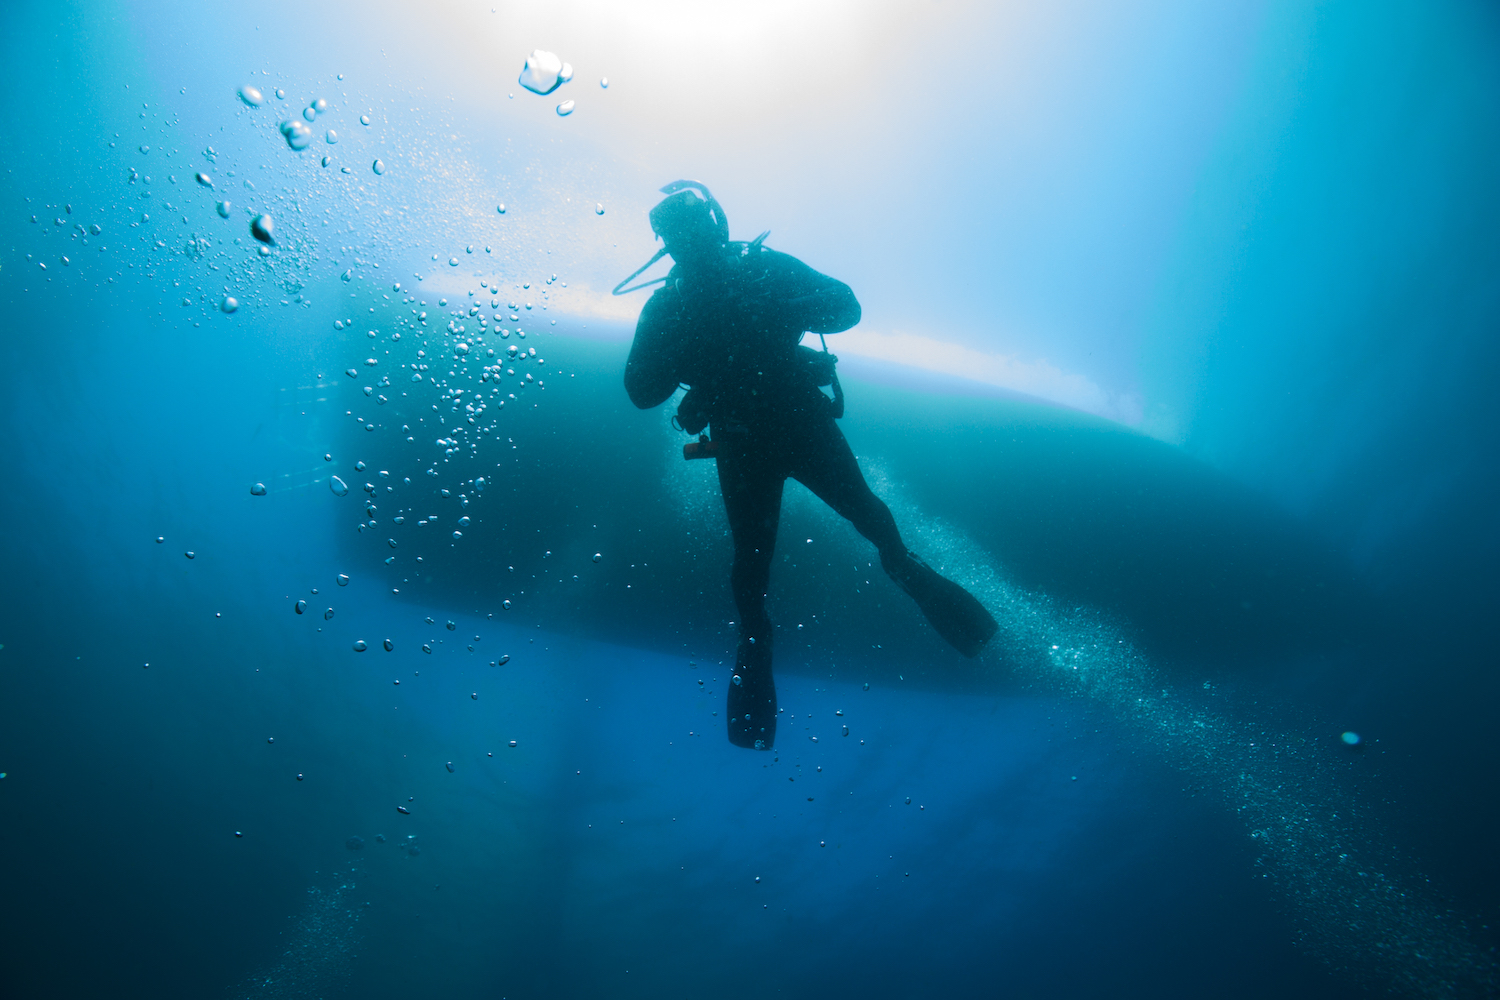 A diver descending from the dive boat into the water and who can minimize scuba diving dangers by following safe practices